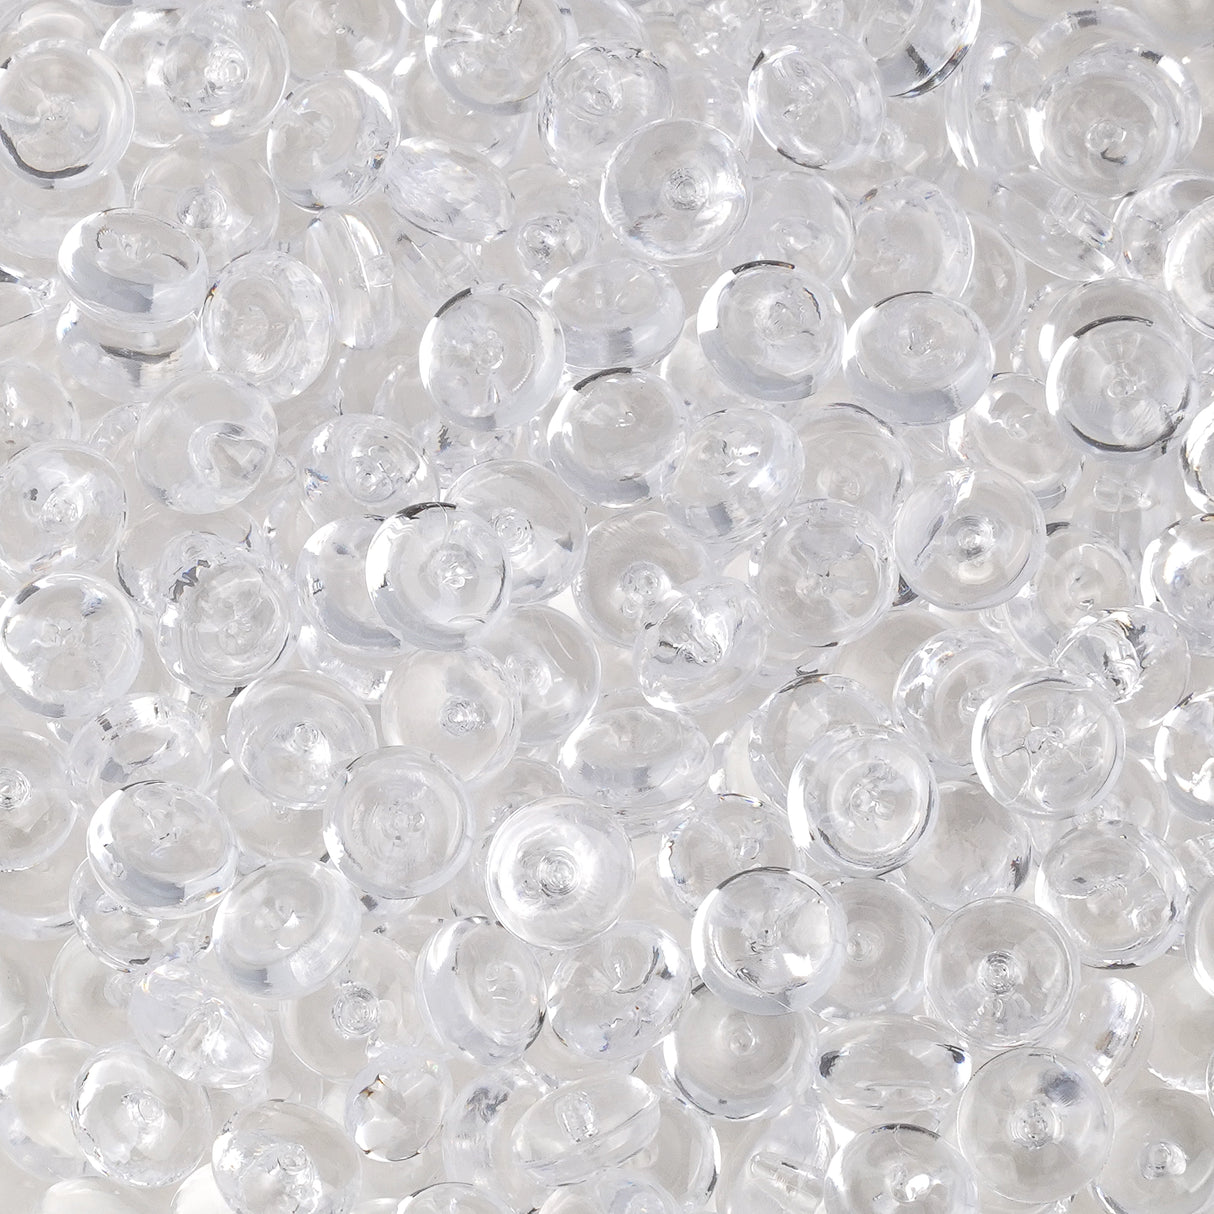 Fish Bowl Beads - Clear